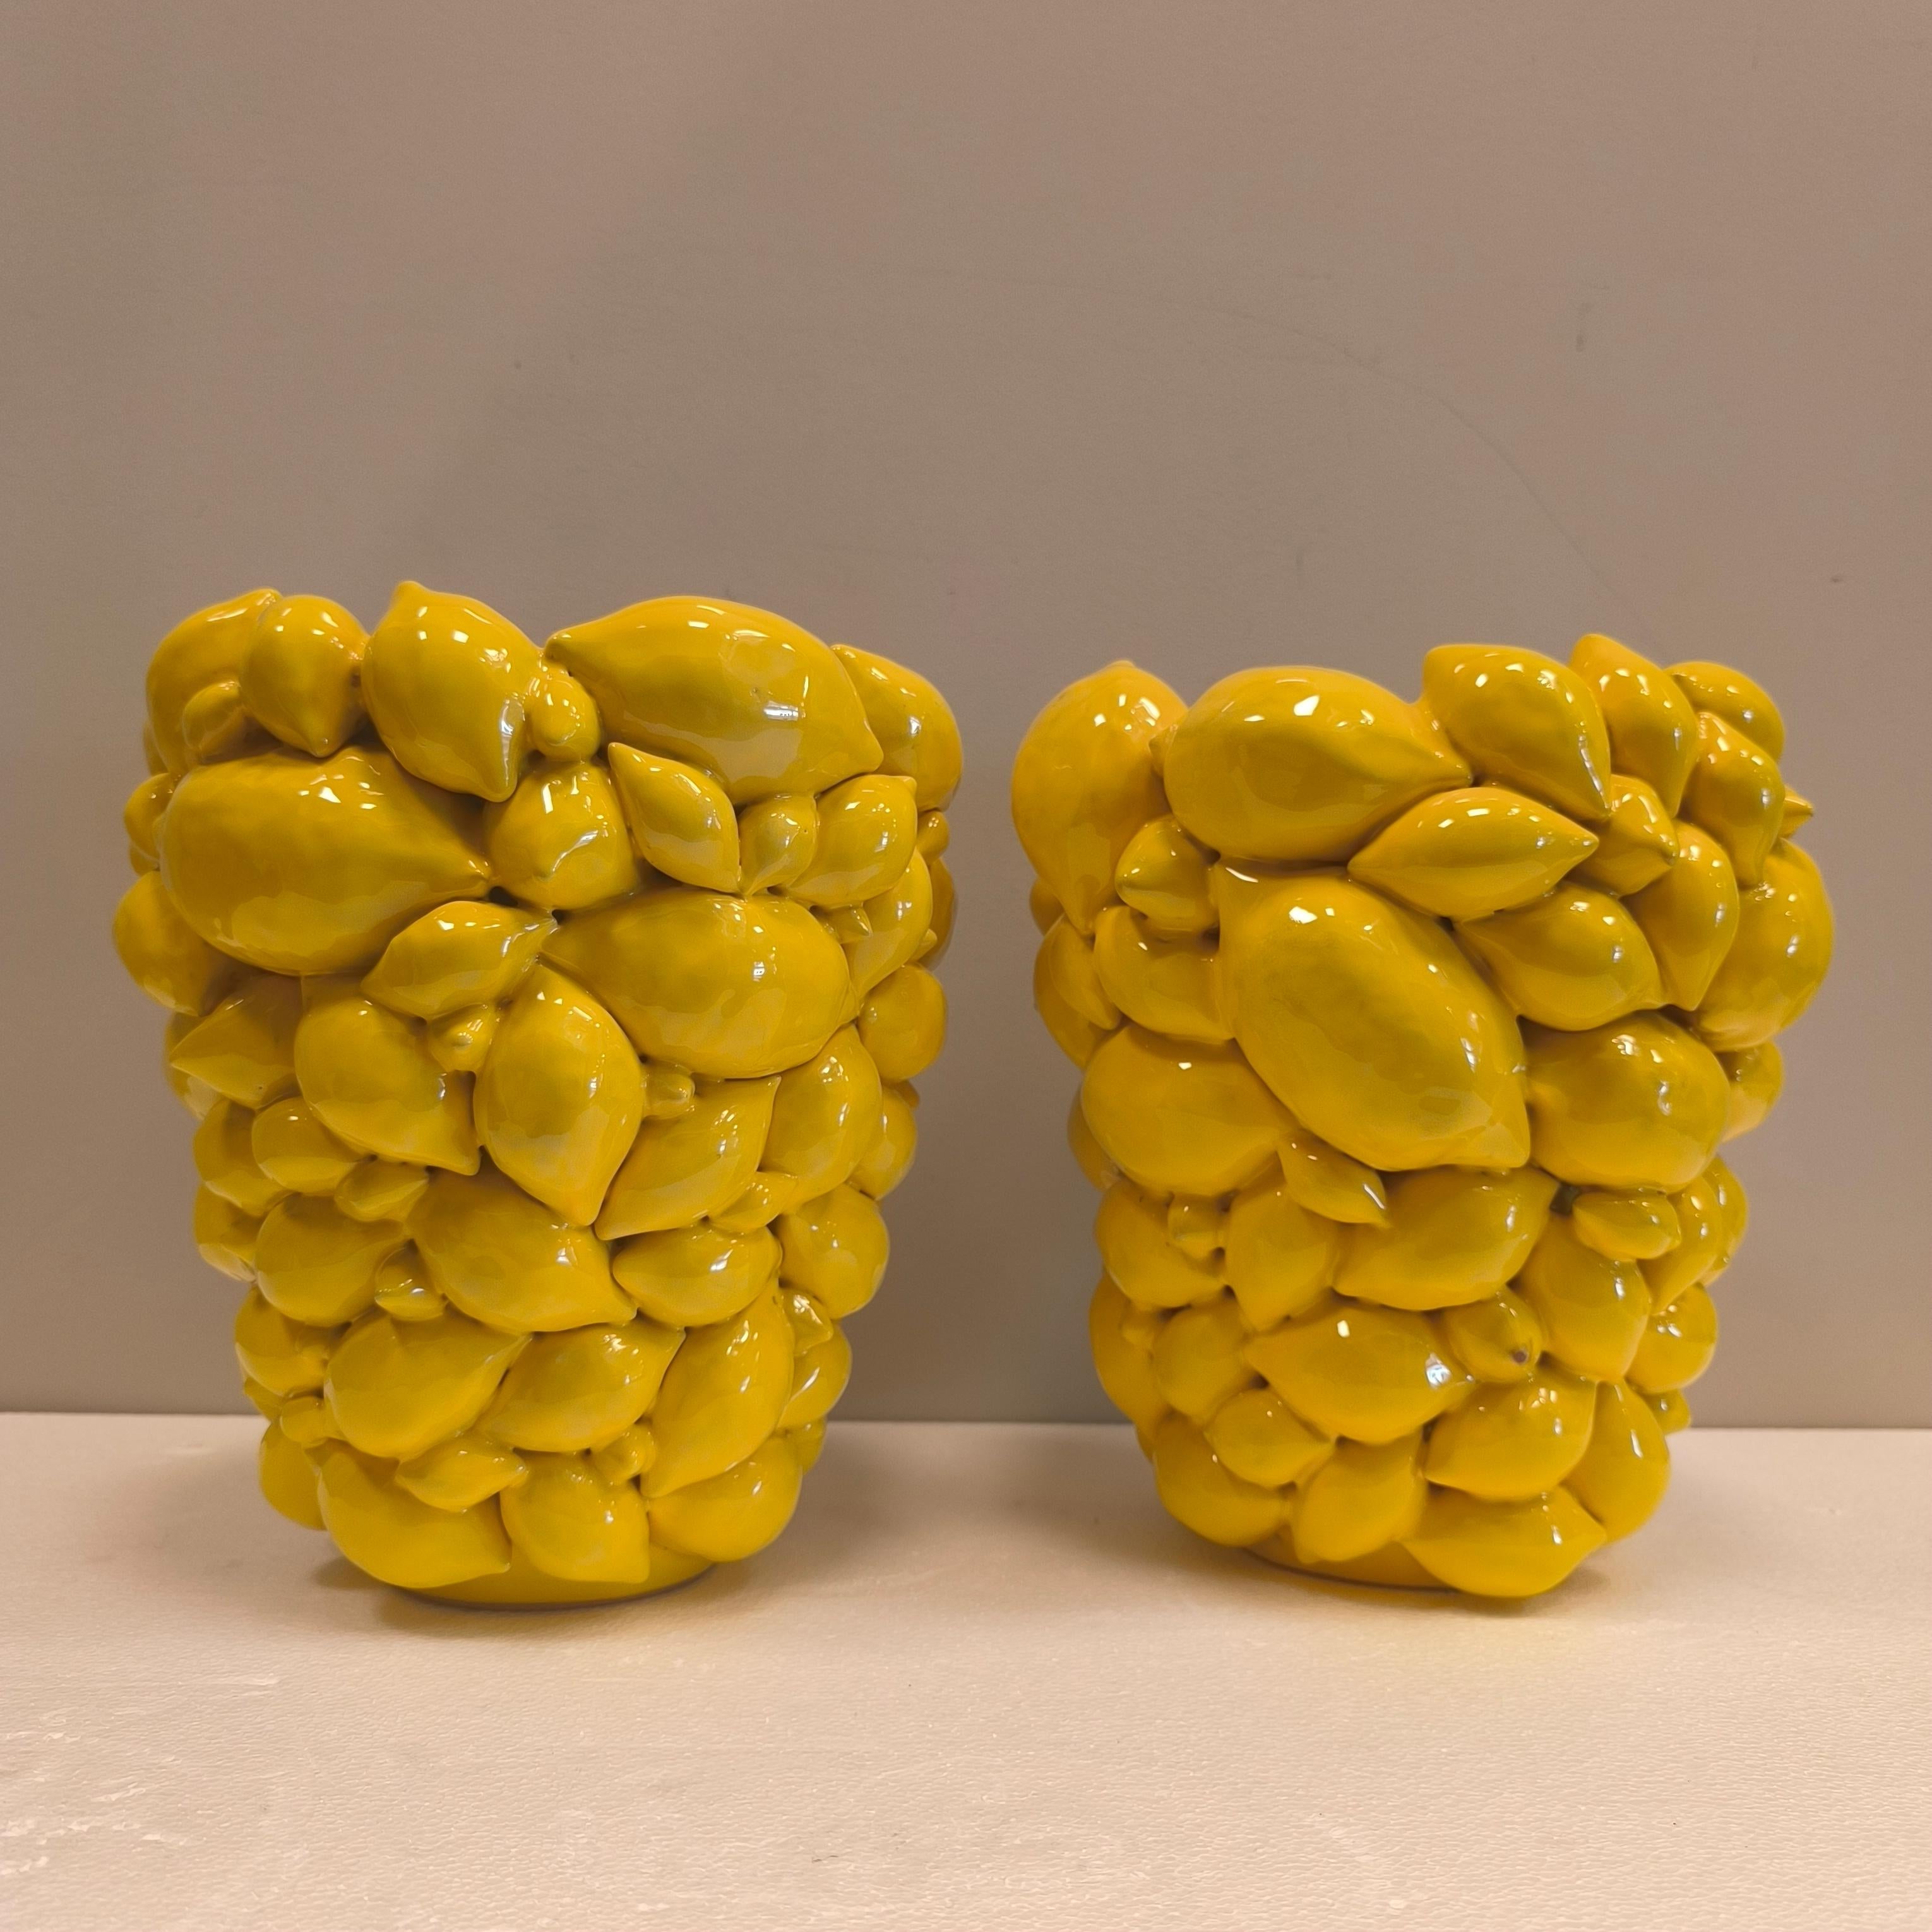 Pair of Italy  lemon vases, Yellow glazed ceramic, R. Acampora, Limited Edition In Excellent Condition For Sale In Valladolid, ES